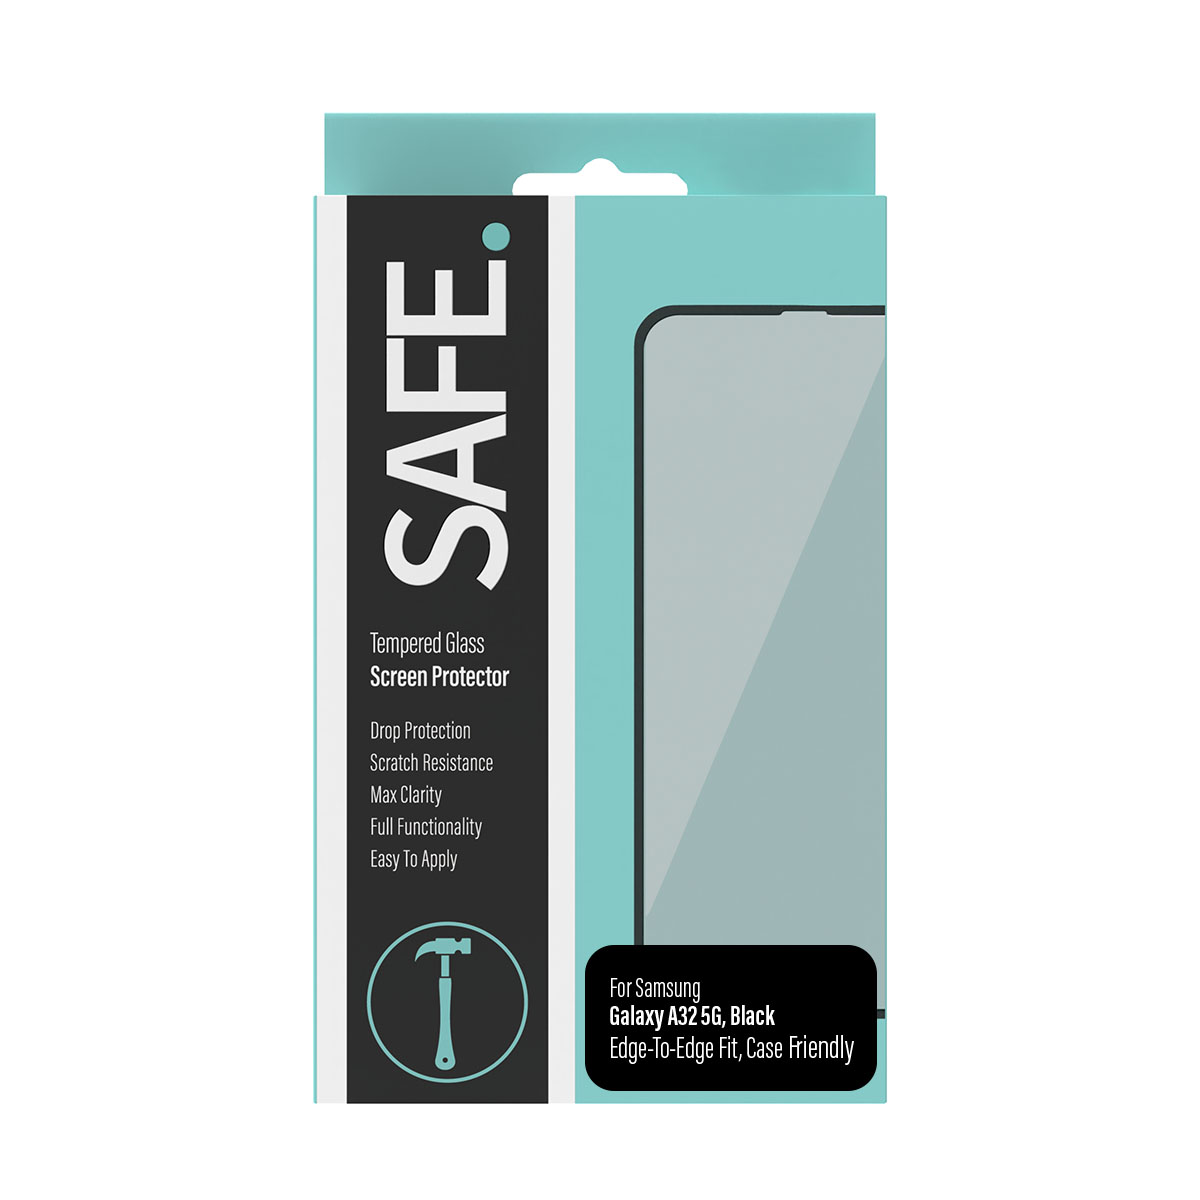 SAFE Samsung Galaxy A32 5G - Screen Protector - Drop Protective, Scratch Resistance, Max Clarity